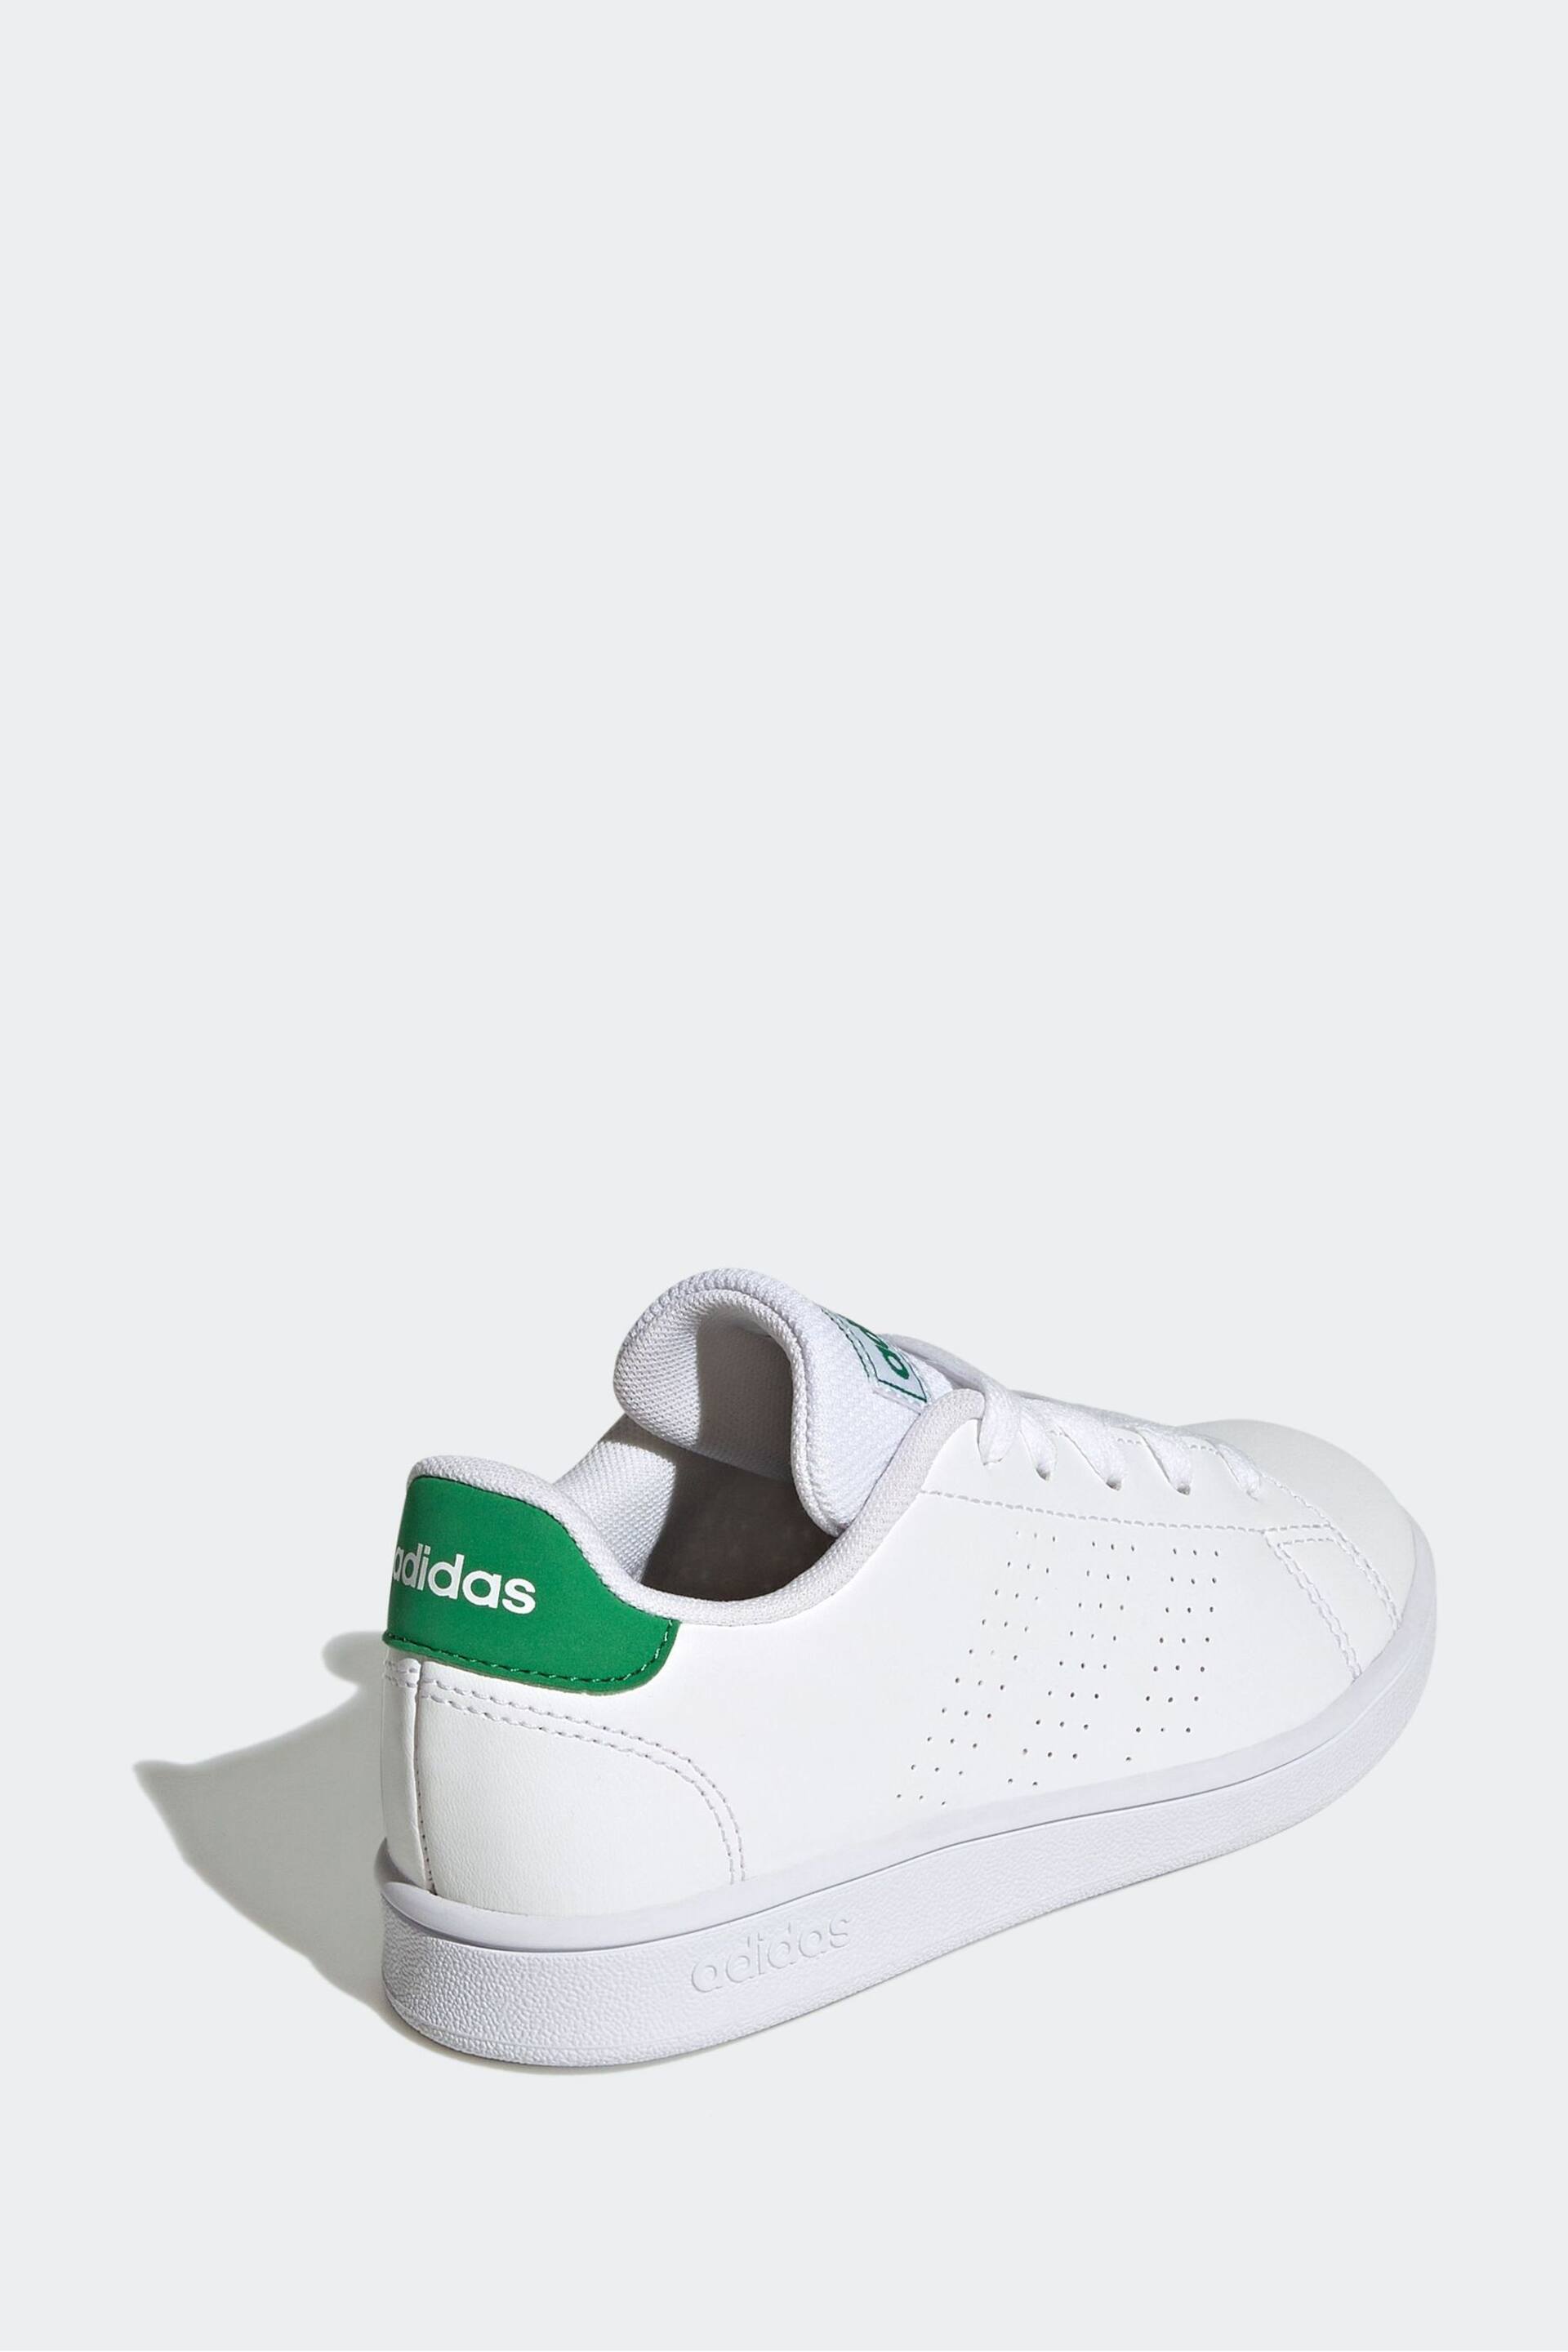 adidas Green/White Sportswear Advantage Lifestyle Court Lace Trainers - Image 3 of 9